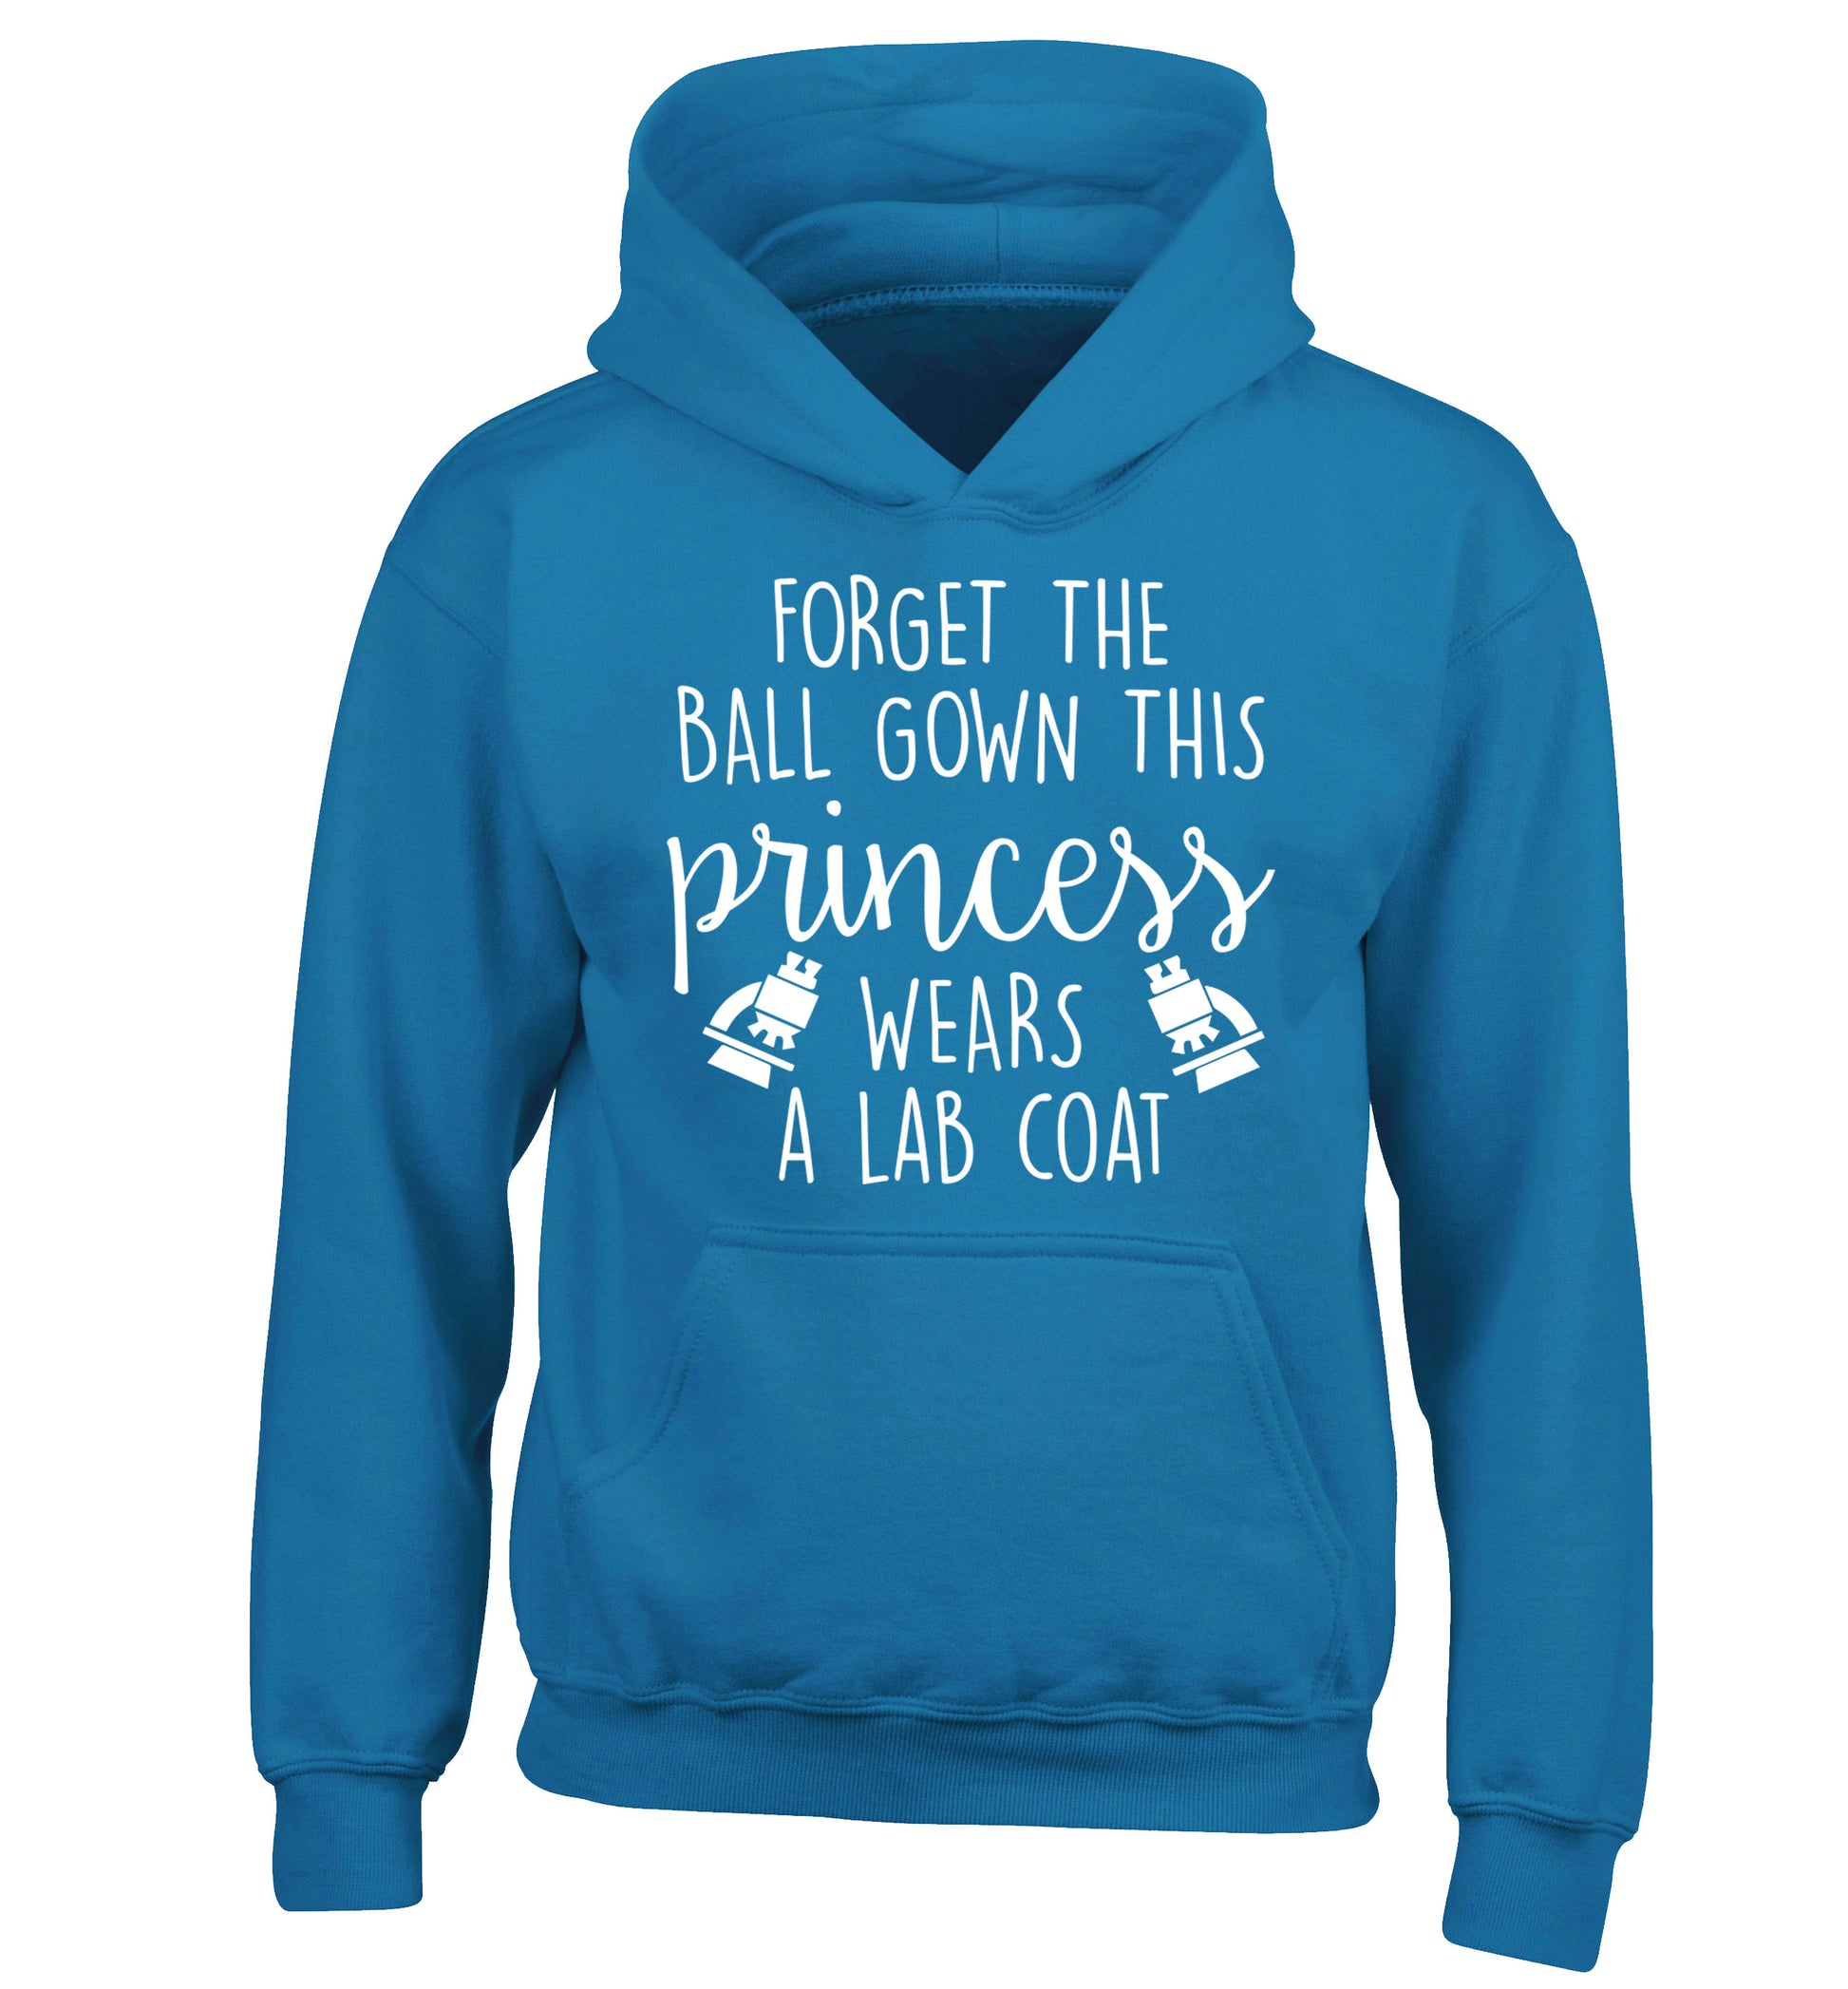 Forget the ball gown this princess wears a lab coat children's blue hoodie 12-14 Years